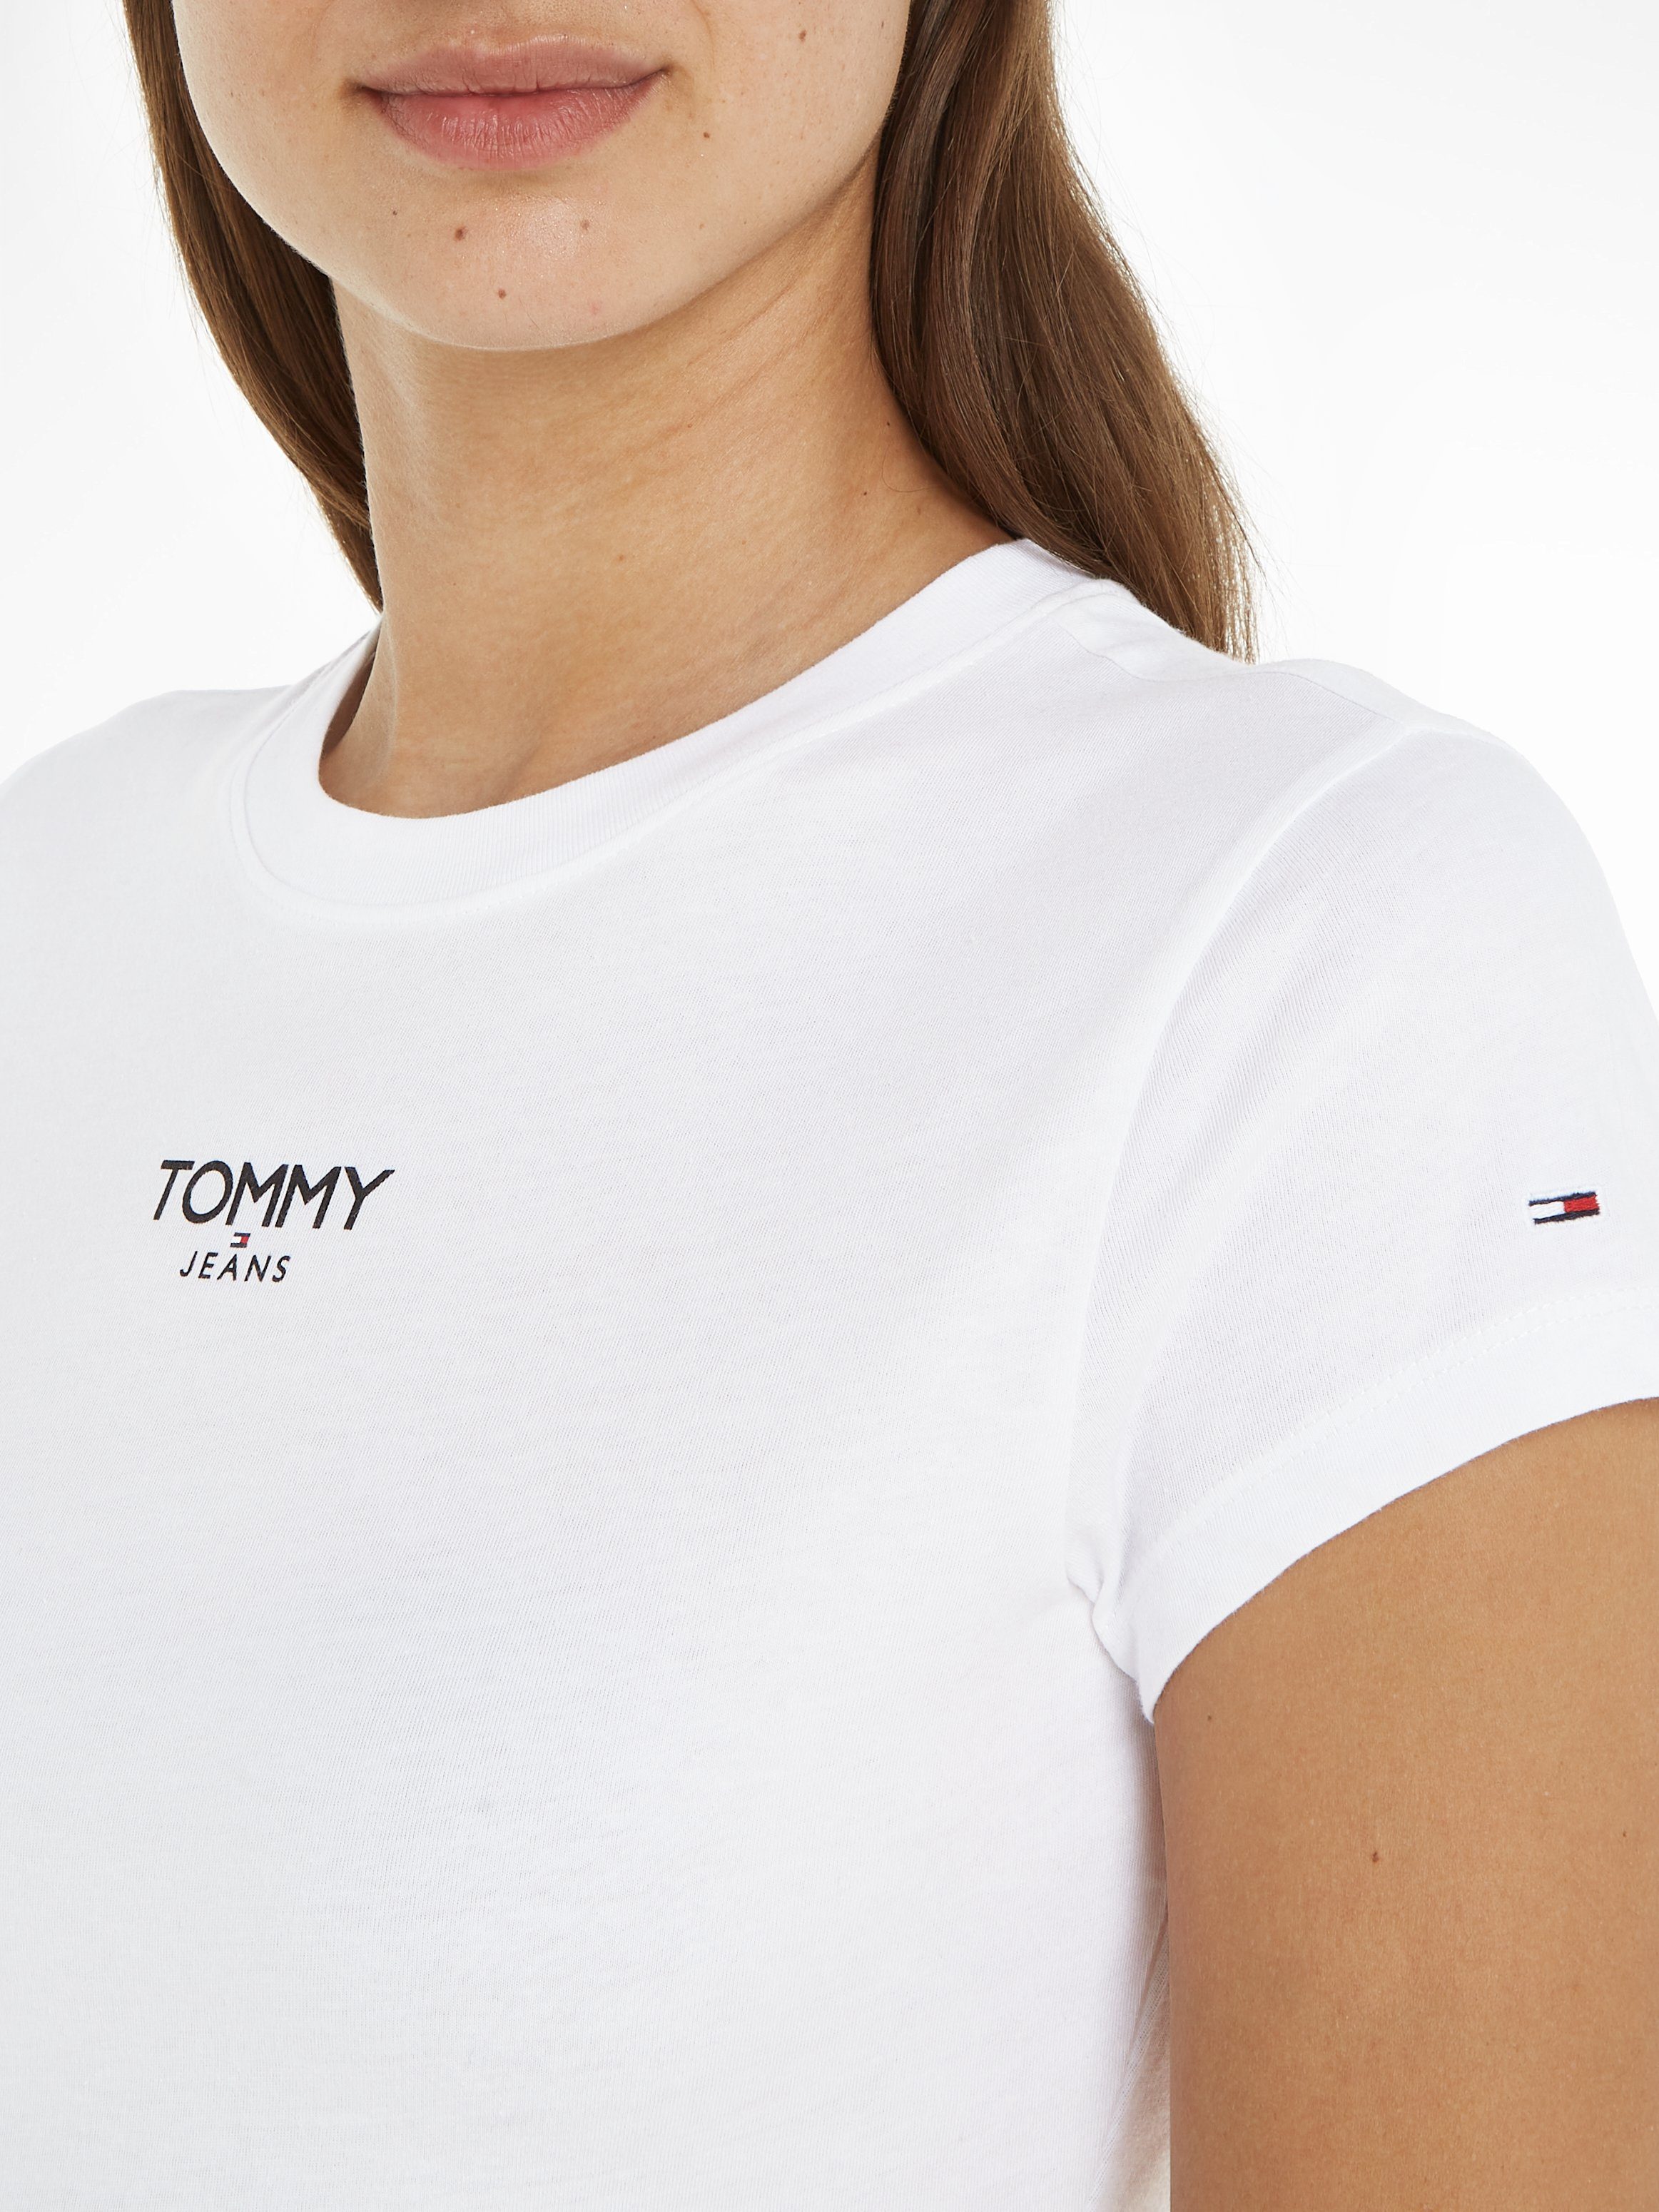 Jeans SS Tommy White T-Shirt BBY Logo Jeans ESSENTIAL TJW mit LOGO Tommy 1